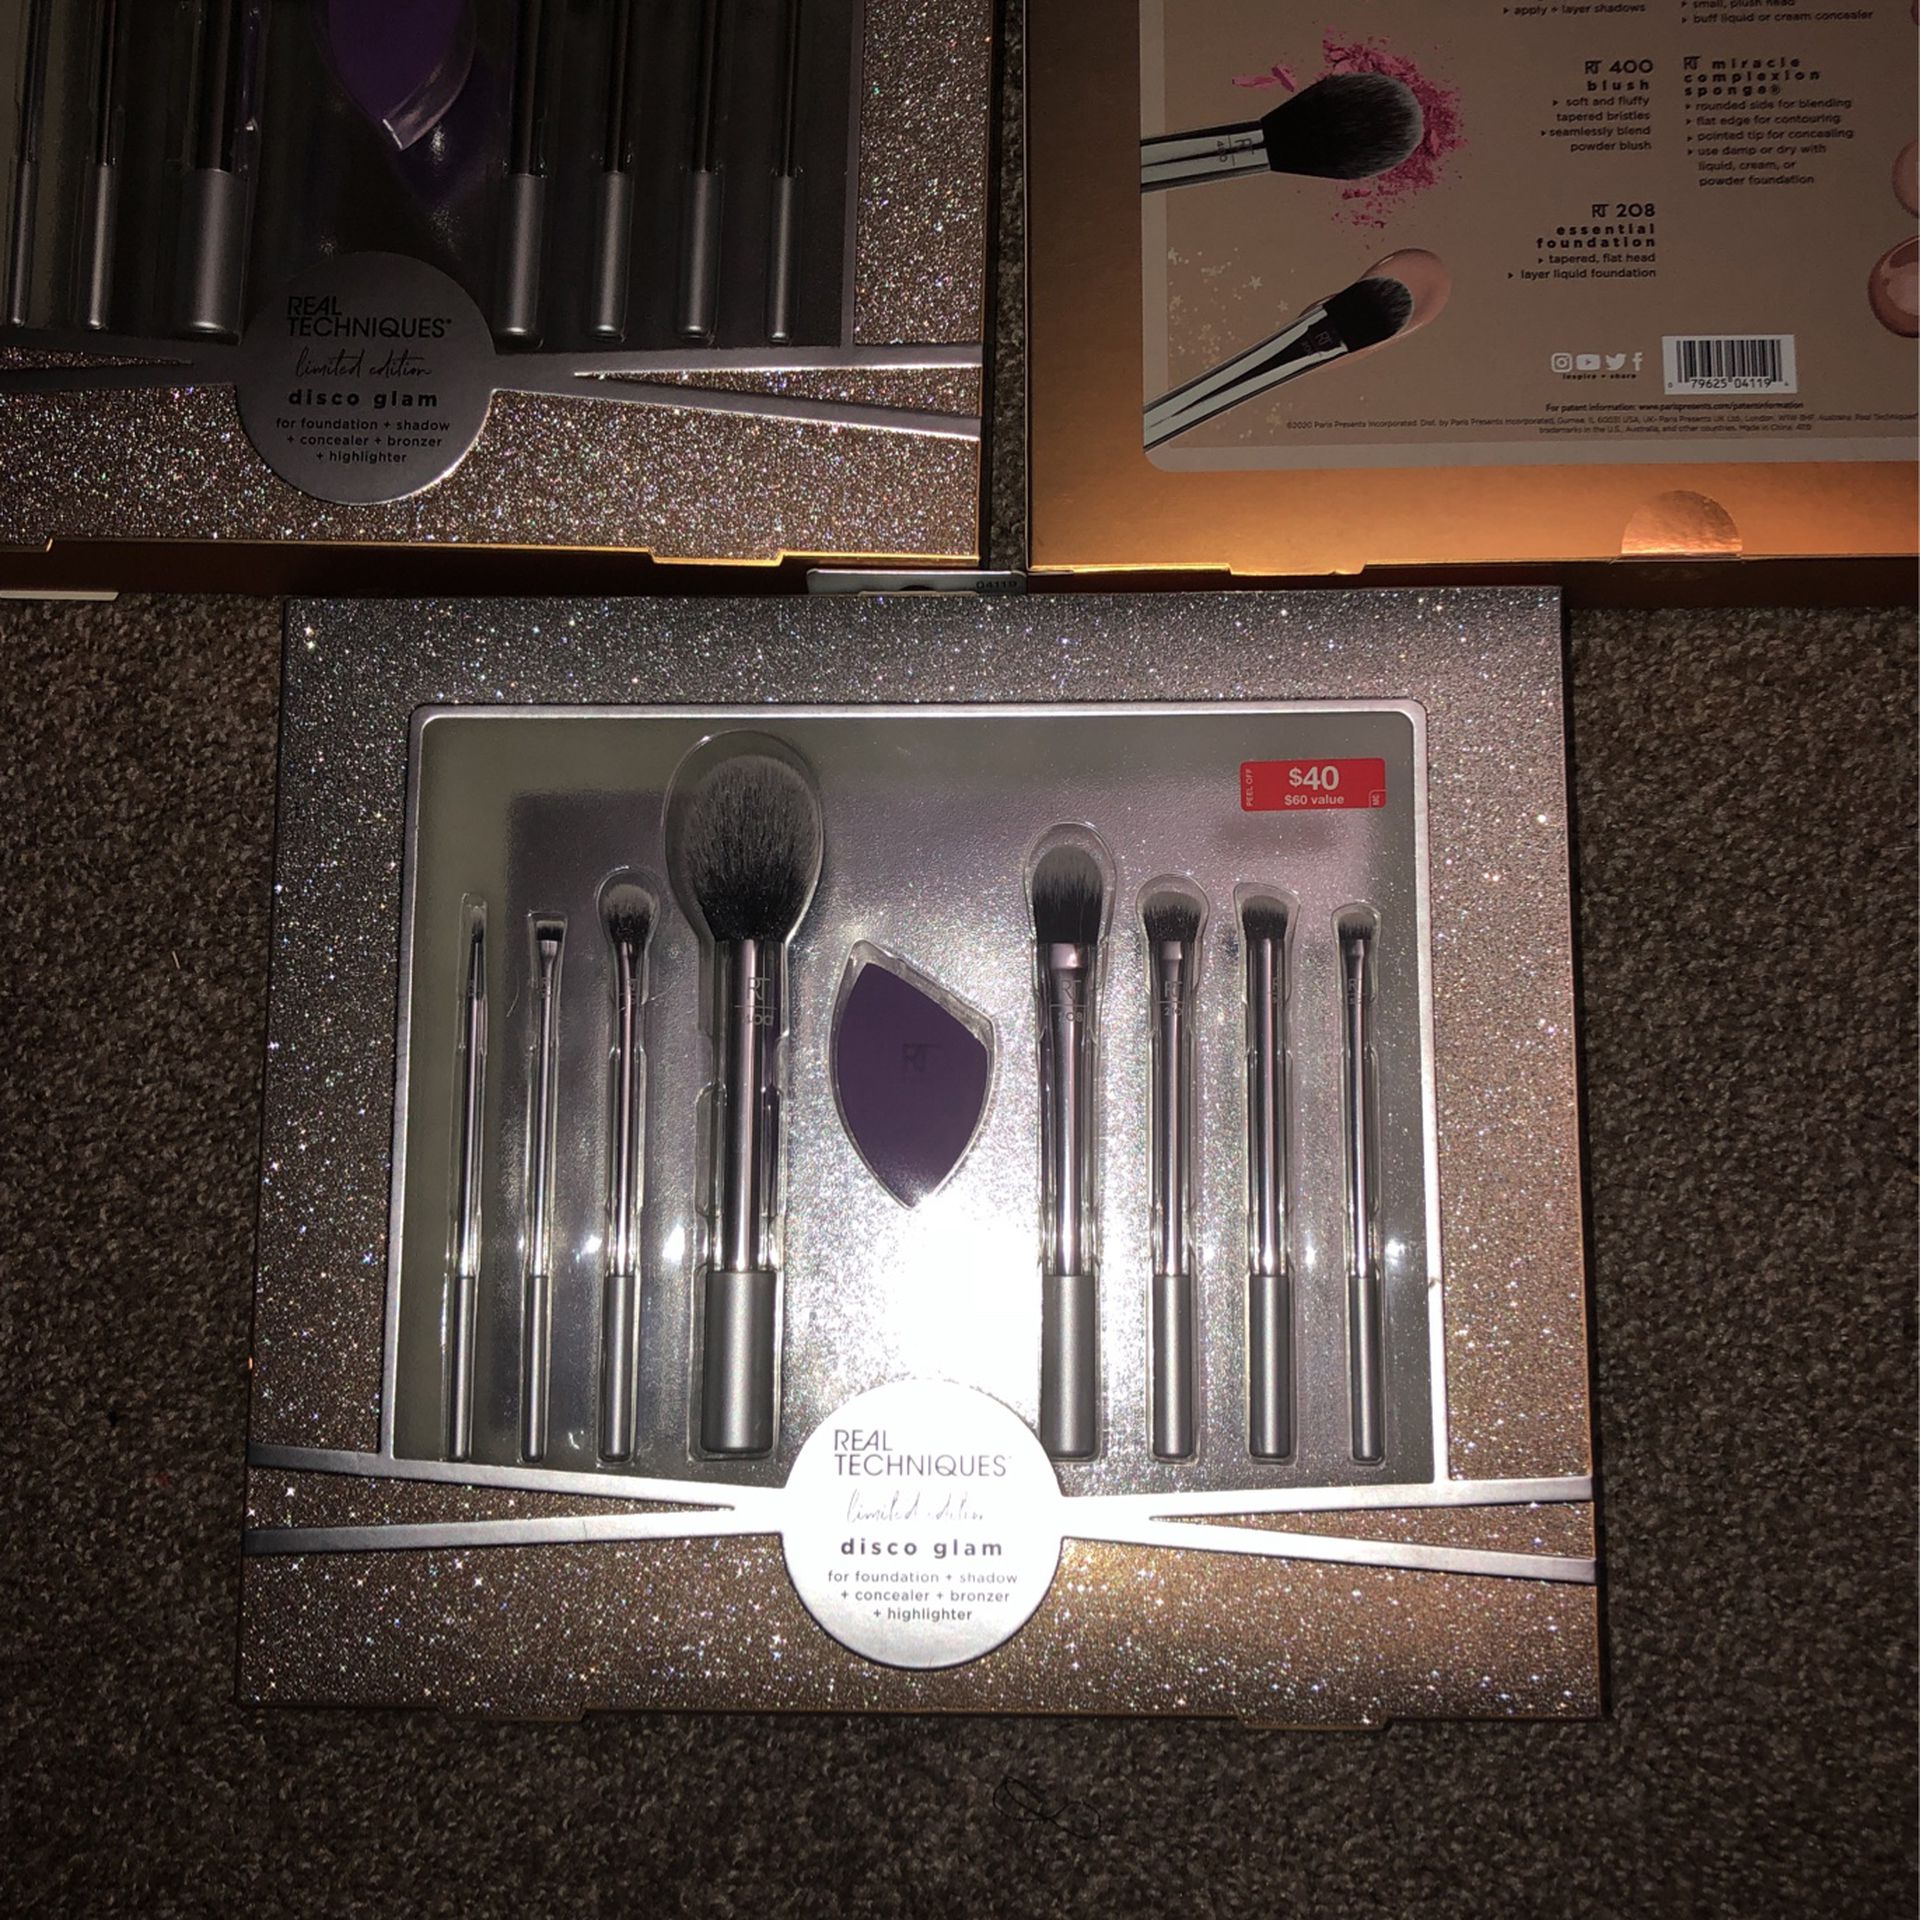 New Make Up Brushes $40 Value Selling For Half Price $20 Each Only 